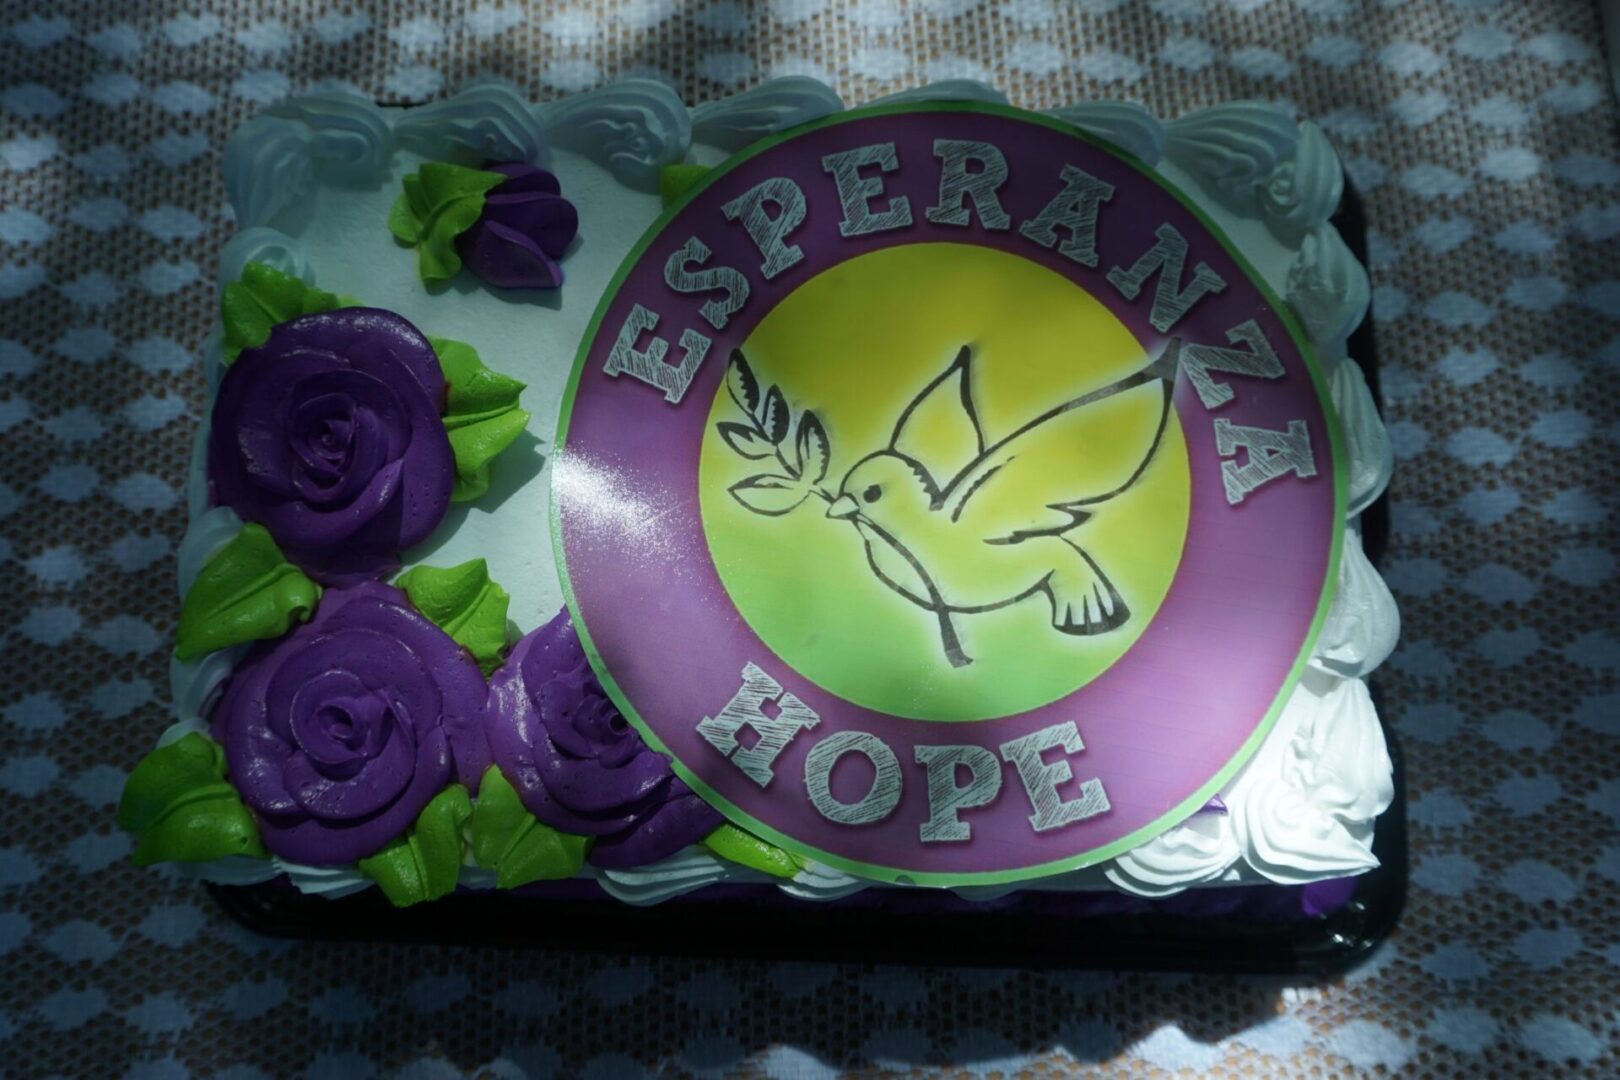 A blue cake with purple flowers and the Esperanza-Hope logo